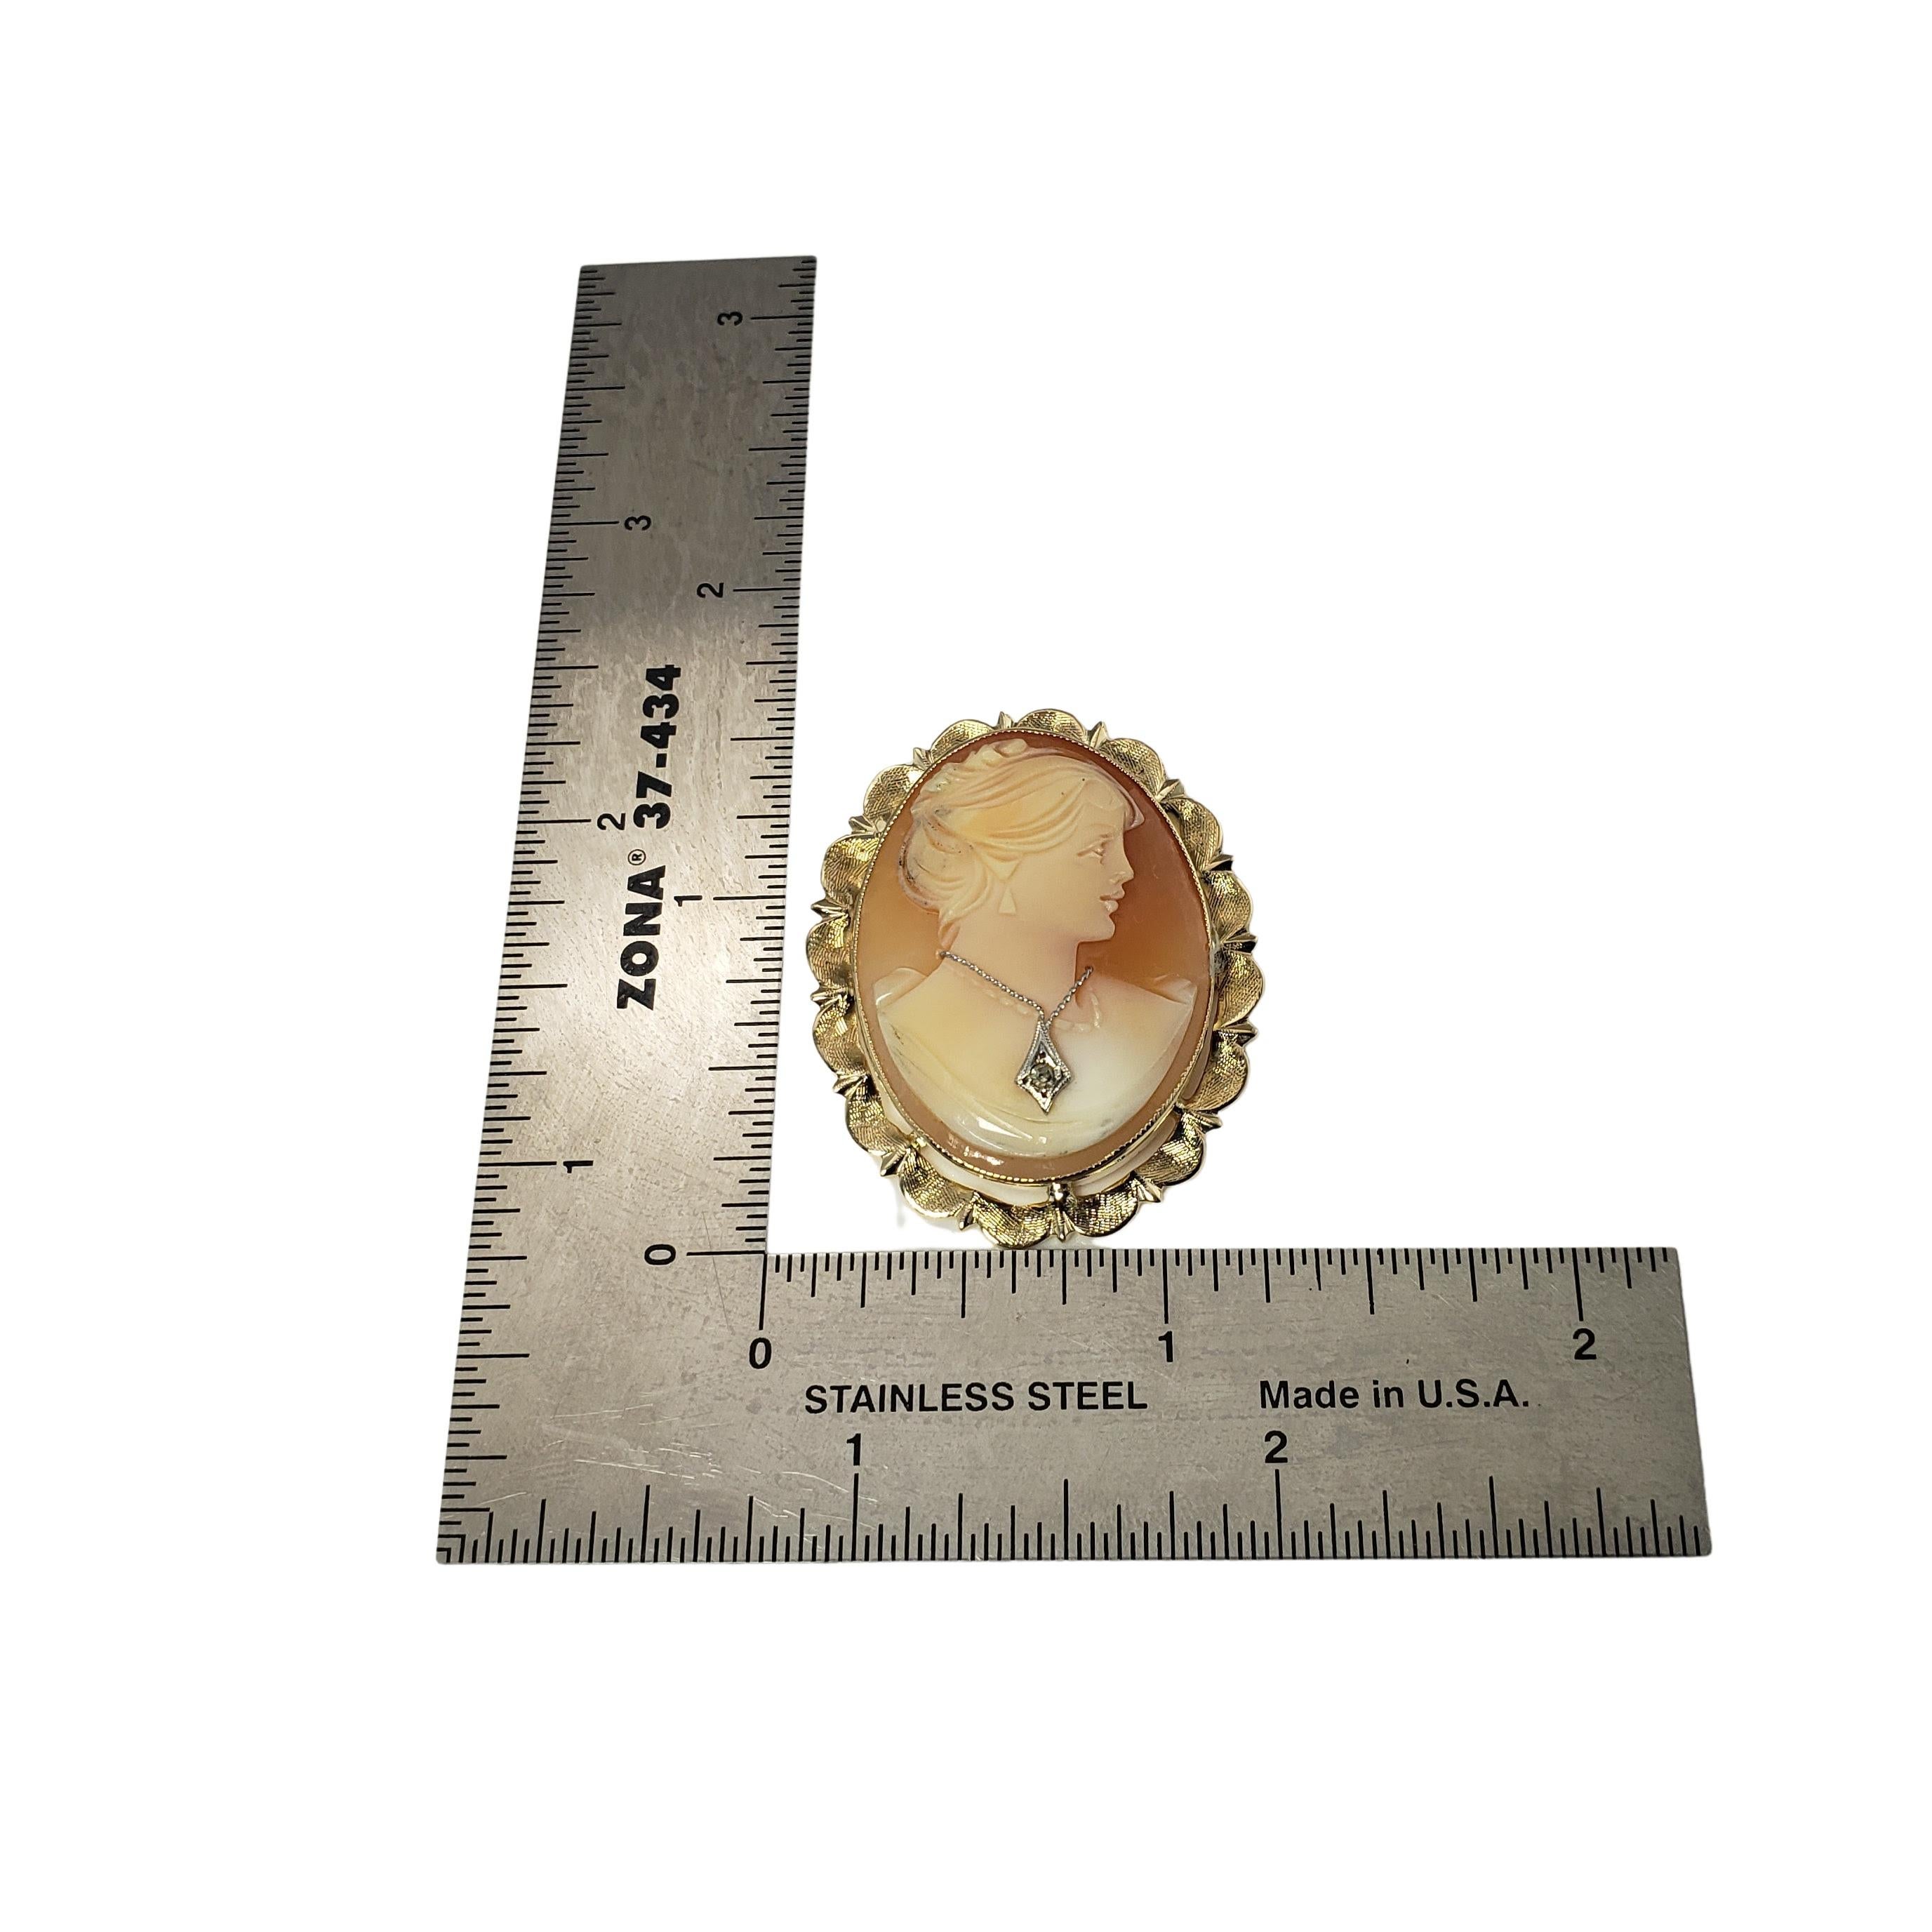 Vintage 14 Karat Yellow Gold and Diamond Cameo Brooch/Pendant-

This elegant brooch features a lovely lady in profile set beautifully detailed 14K gold. Can be worn as a brooch or a pendant. Accented with one round single cut diamond.

Approximate